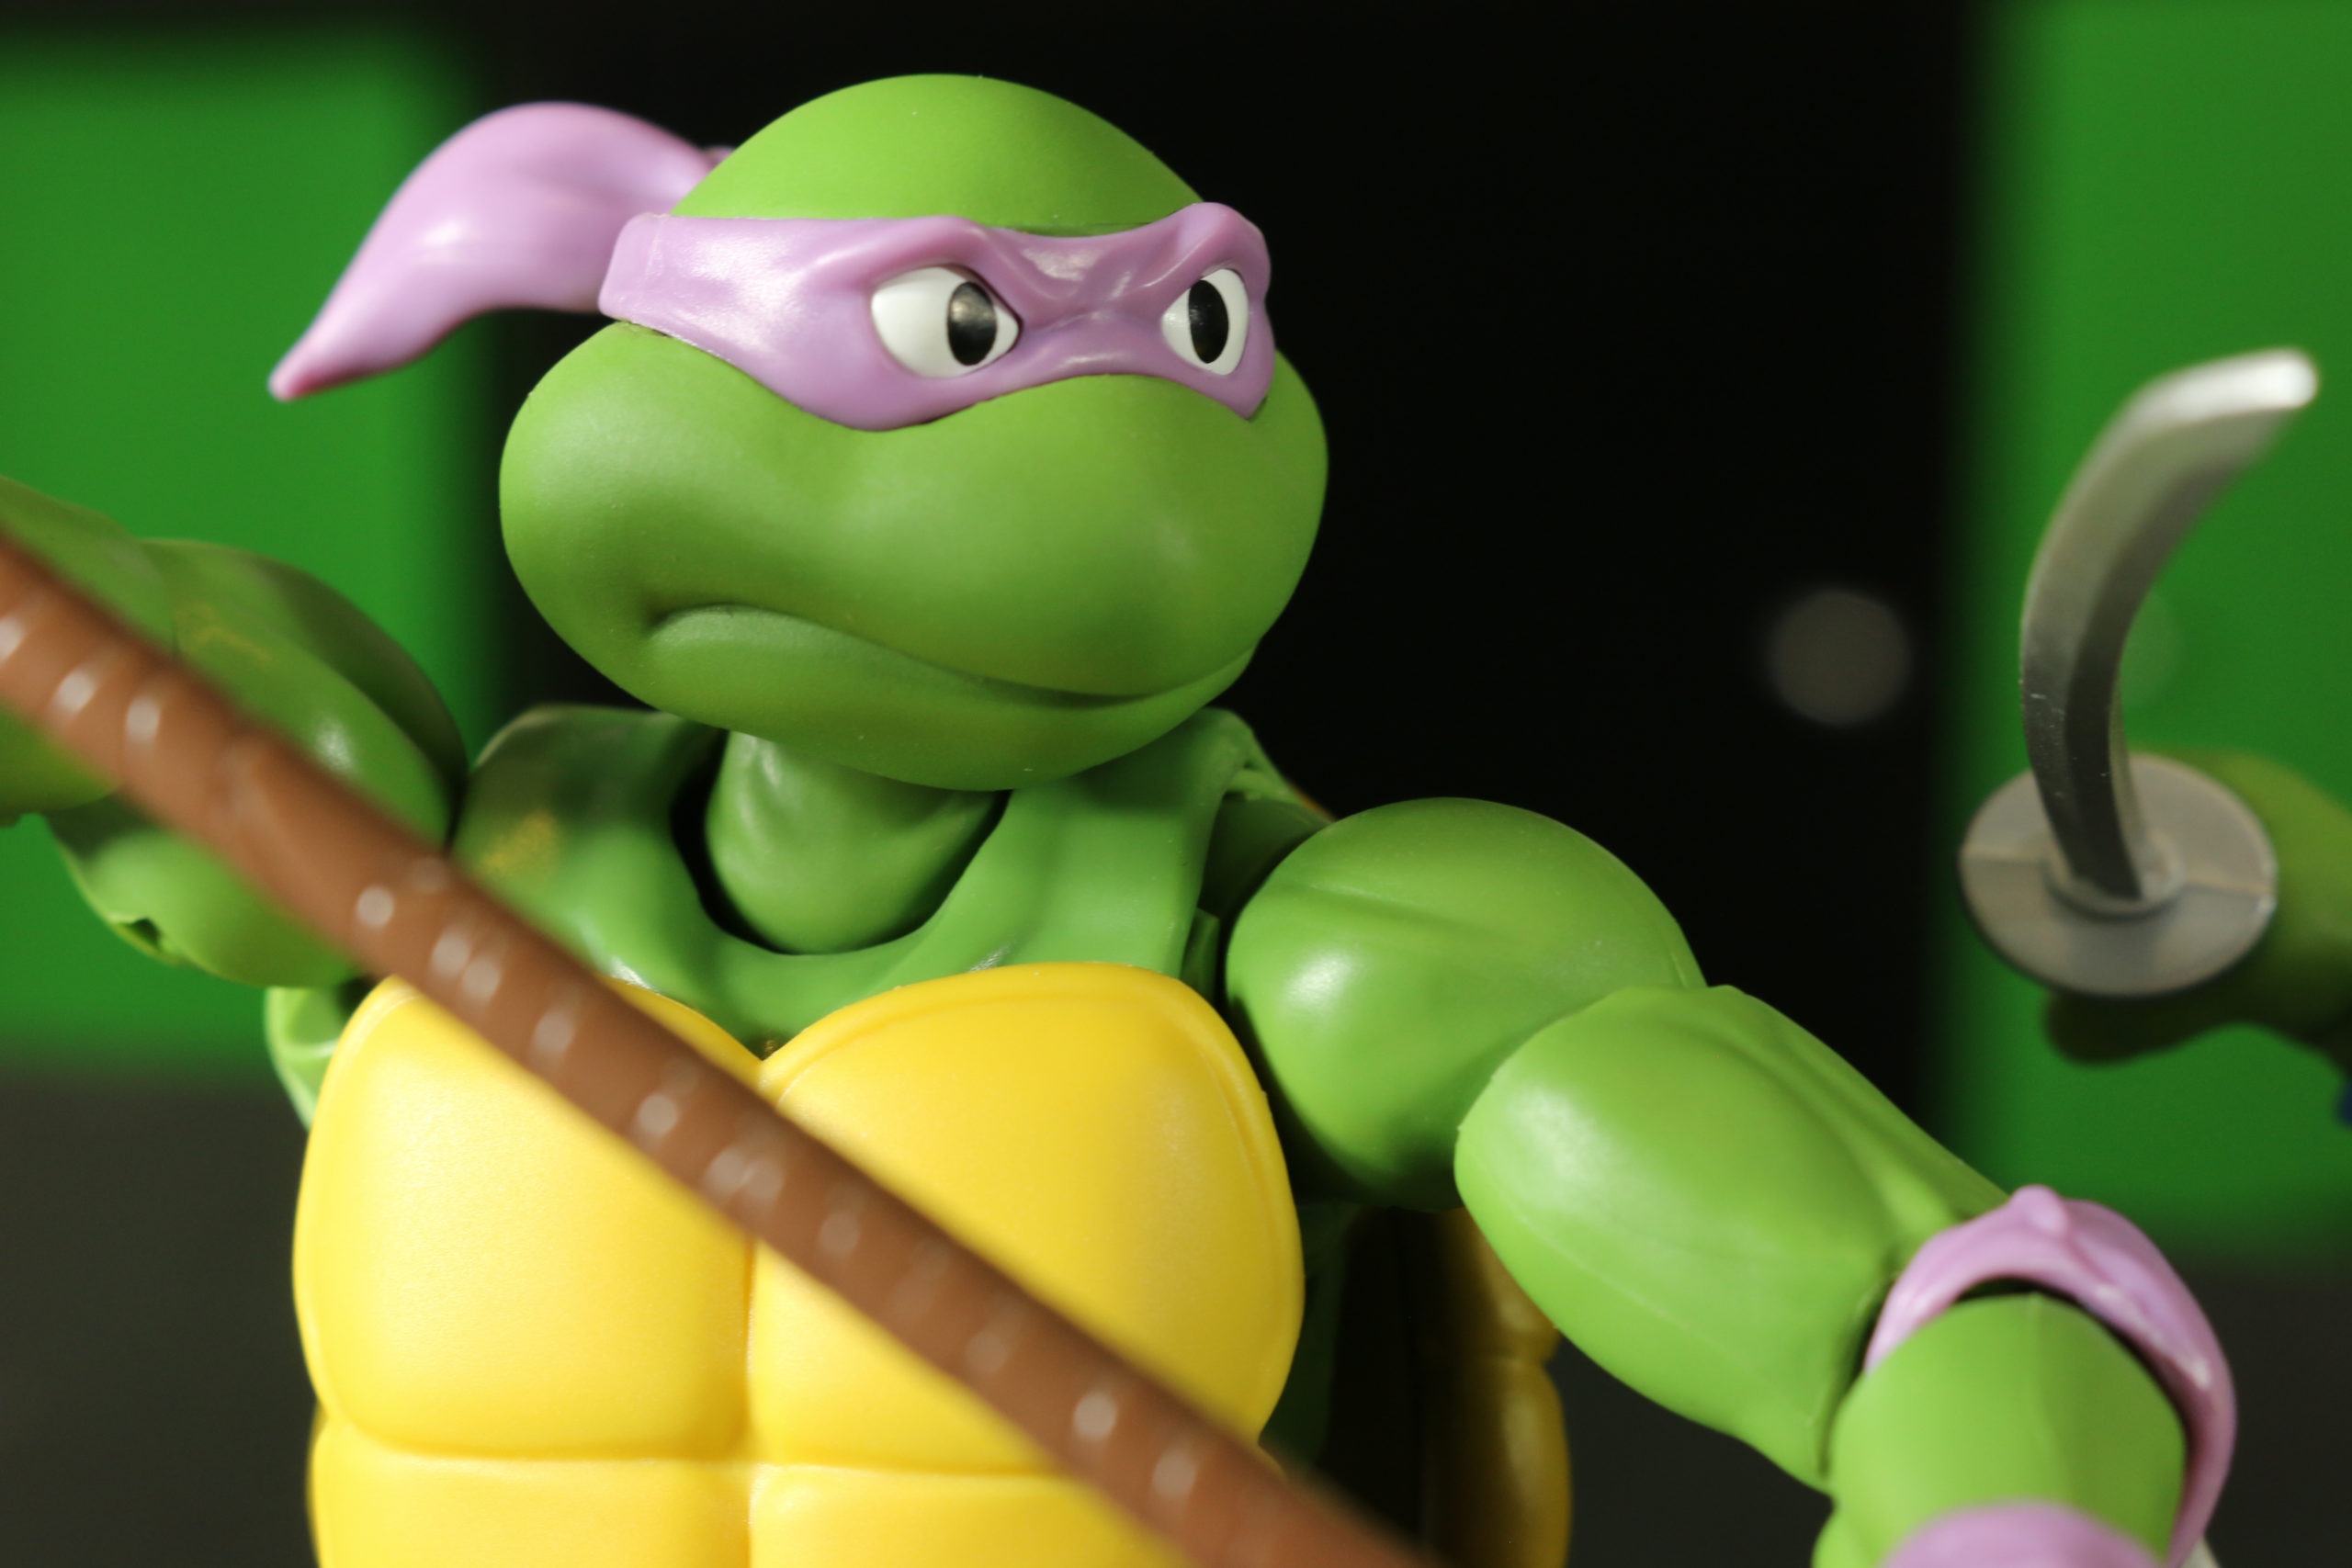 Bandai’s New TMNT Figures Are The Heroes In A Halfshell We Deserve